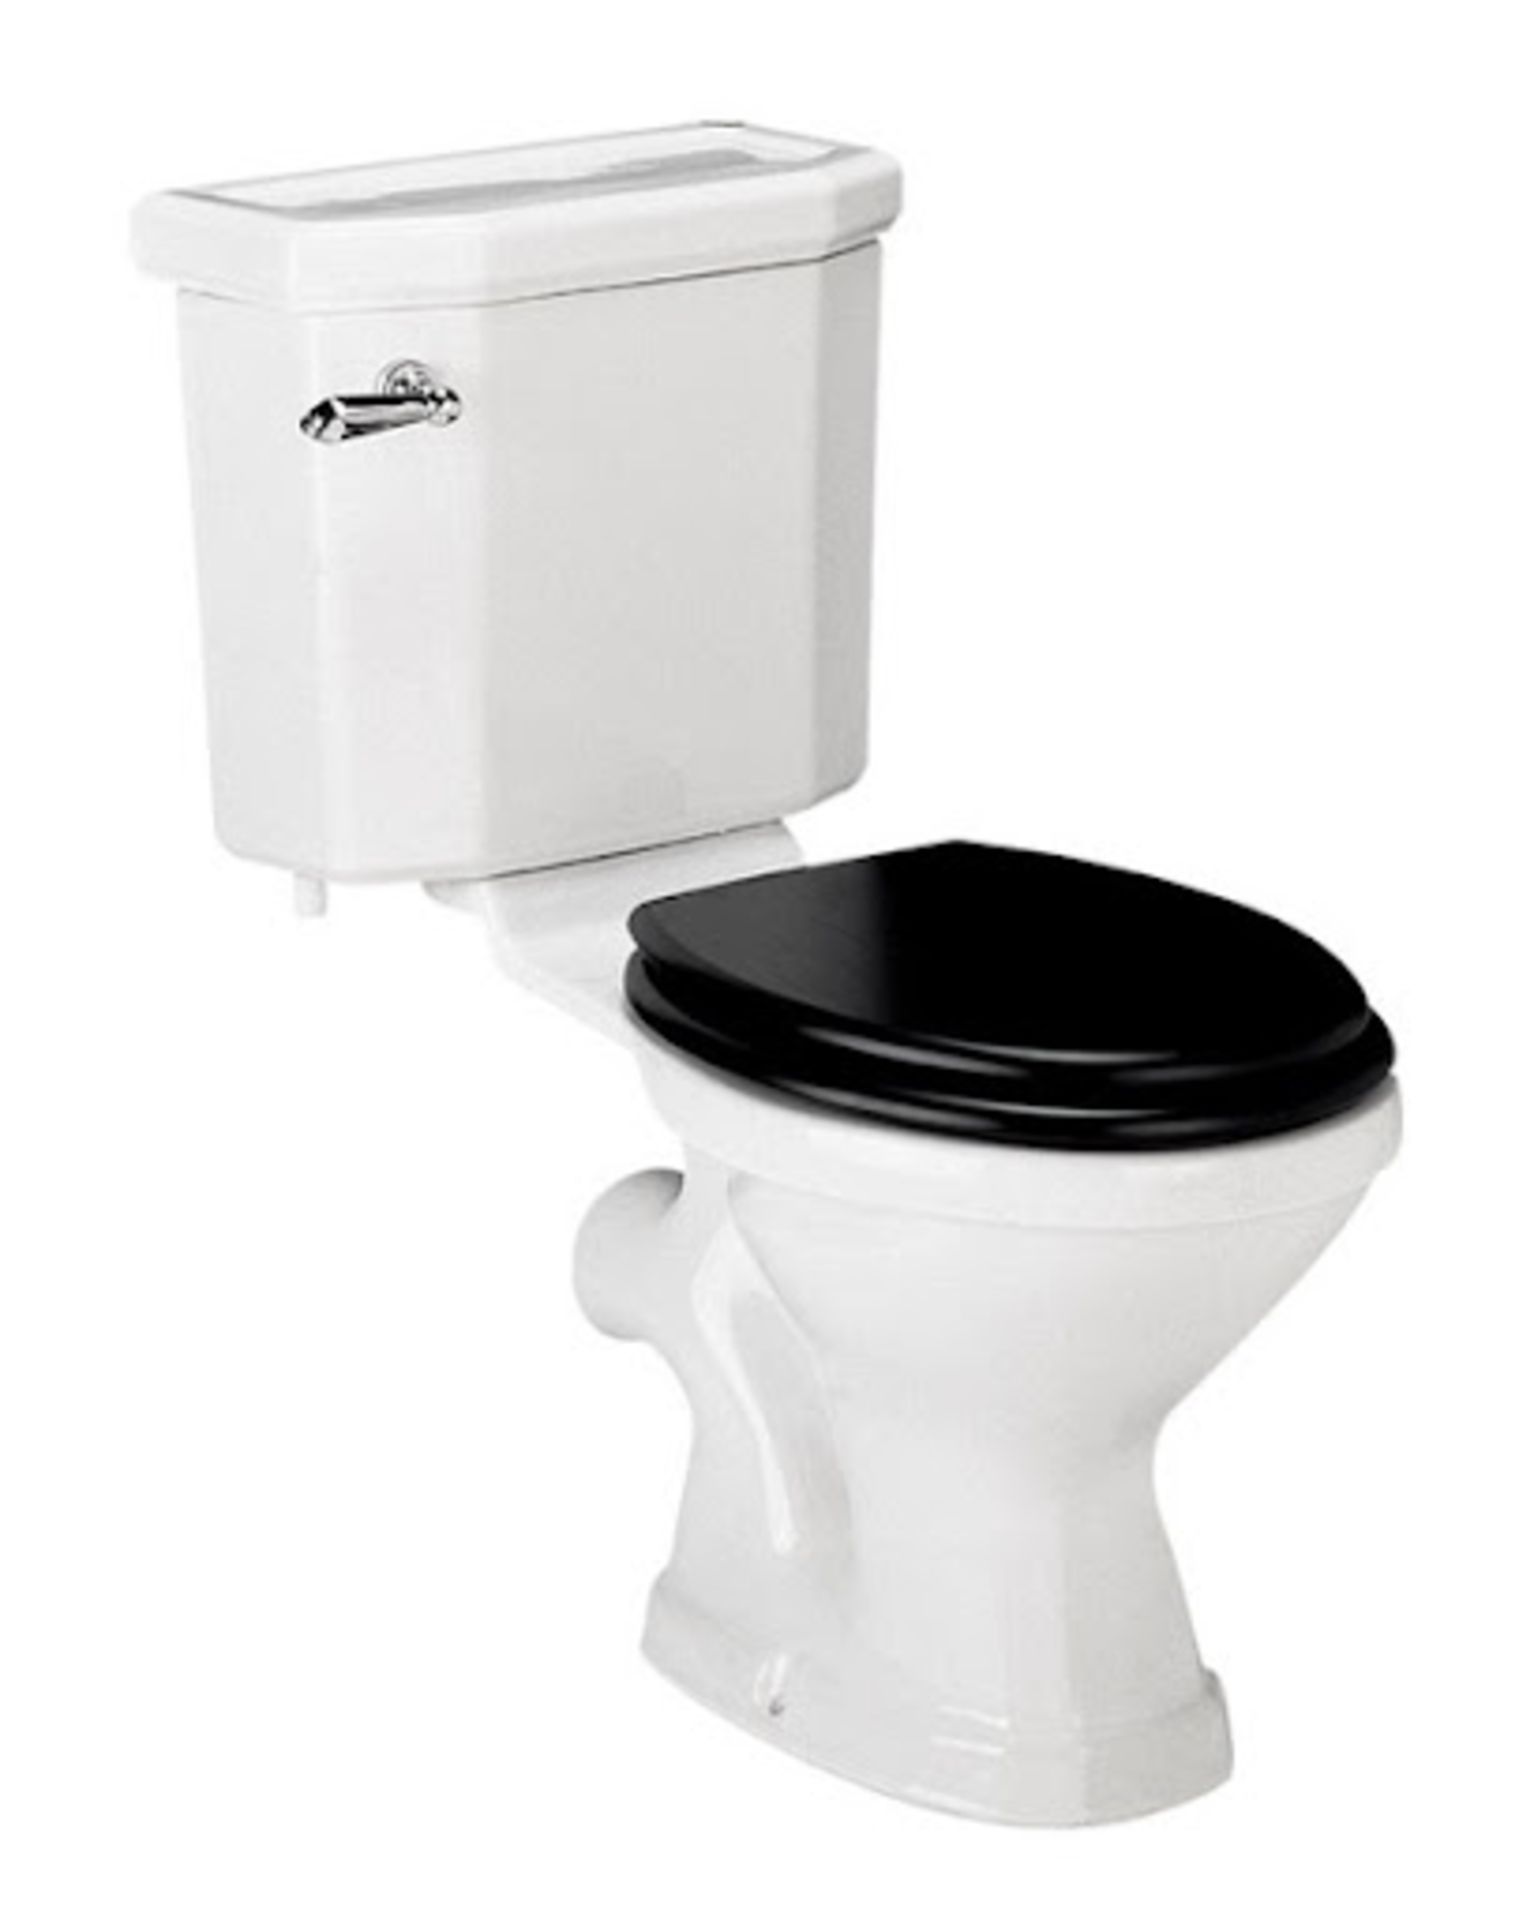 New Twyford Clarice Close Coupled Toilet Set. Product Code: Cl1148Wh The Clarice Close Coupled ... - Image 2 of 2